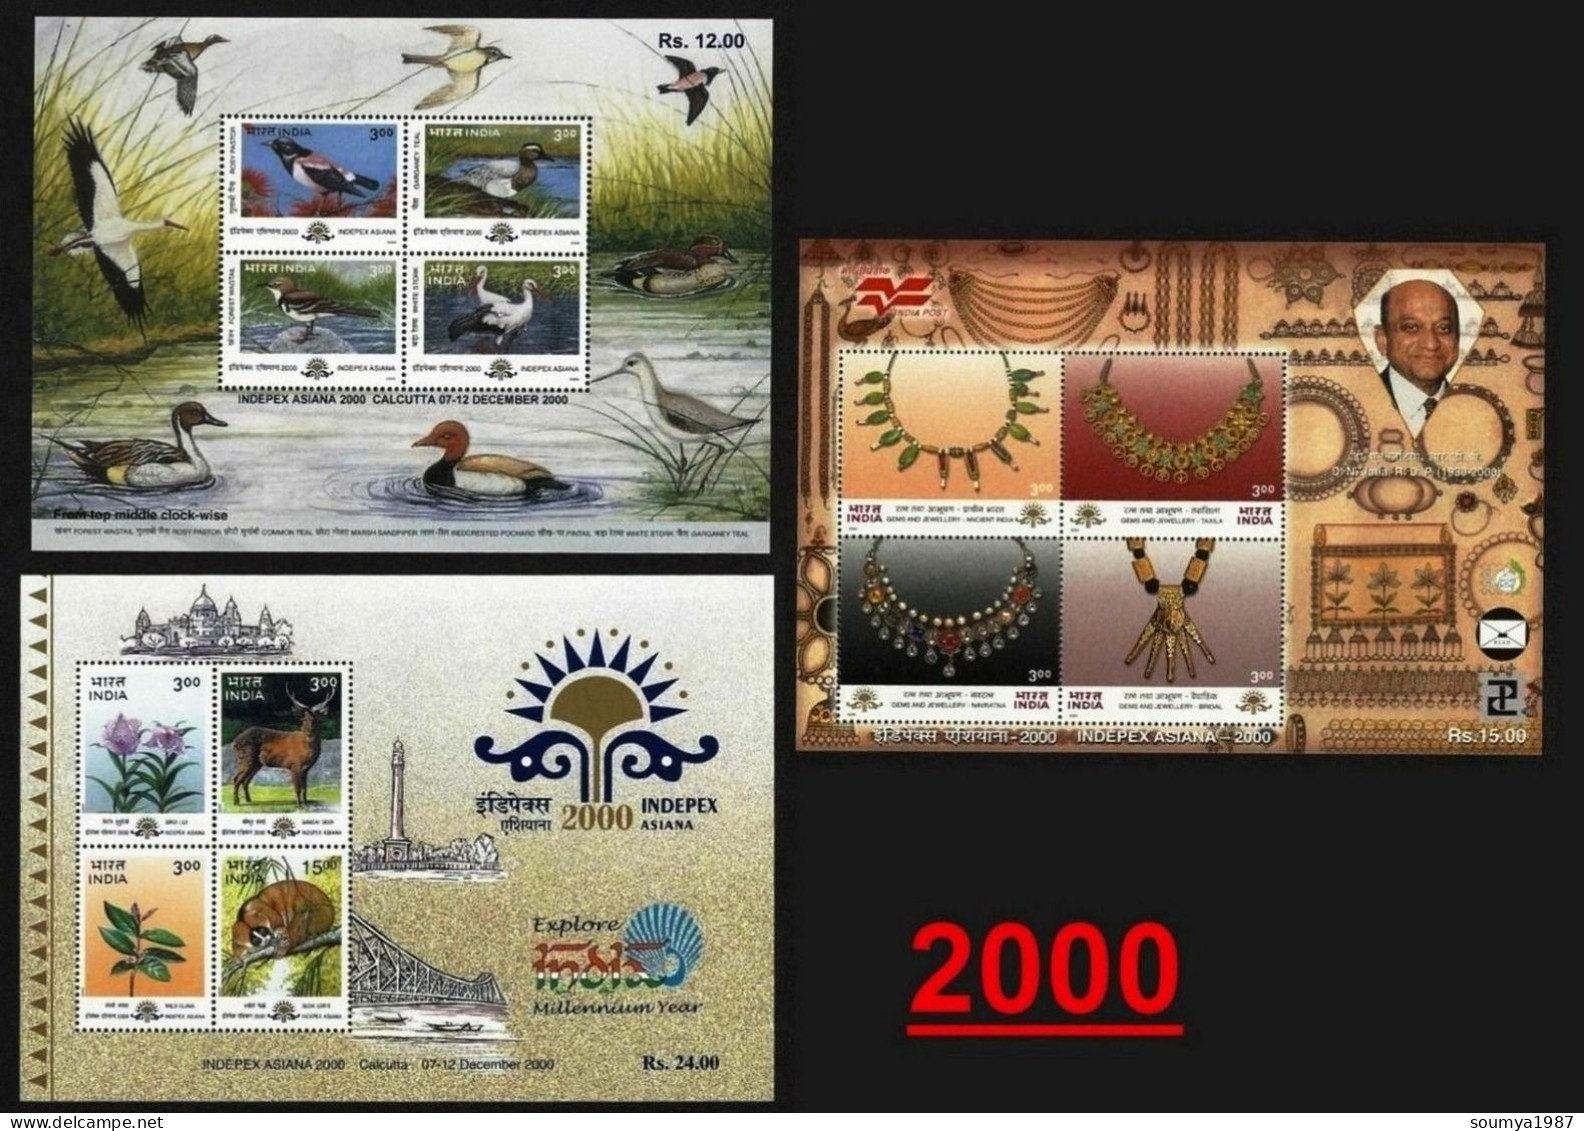 INDIA 2000 COMPLETE YEAR PACK OF MINIATURE SHEETS CONTAINS 3 MS OF FLOWERS, ANIMALS, BIRDS, JUALARY, INDIPEX MS MNH - Ongebruikt